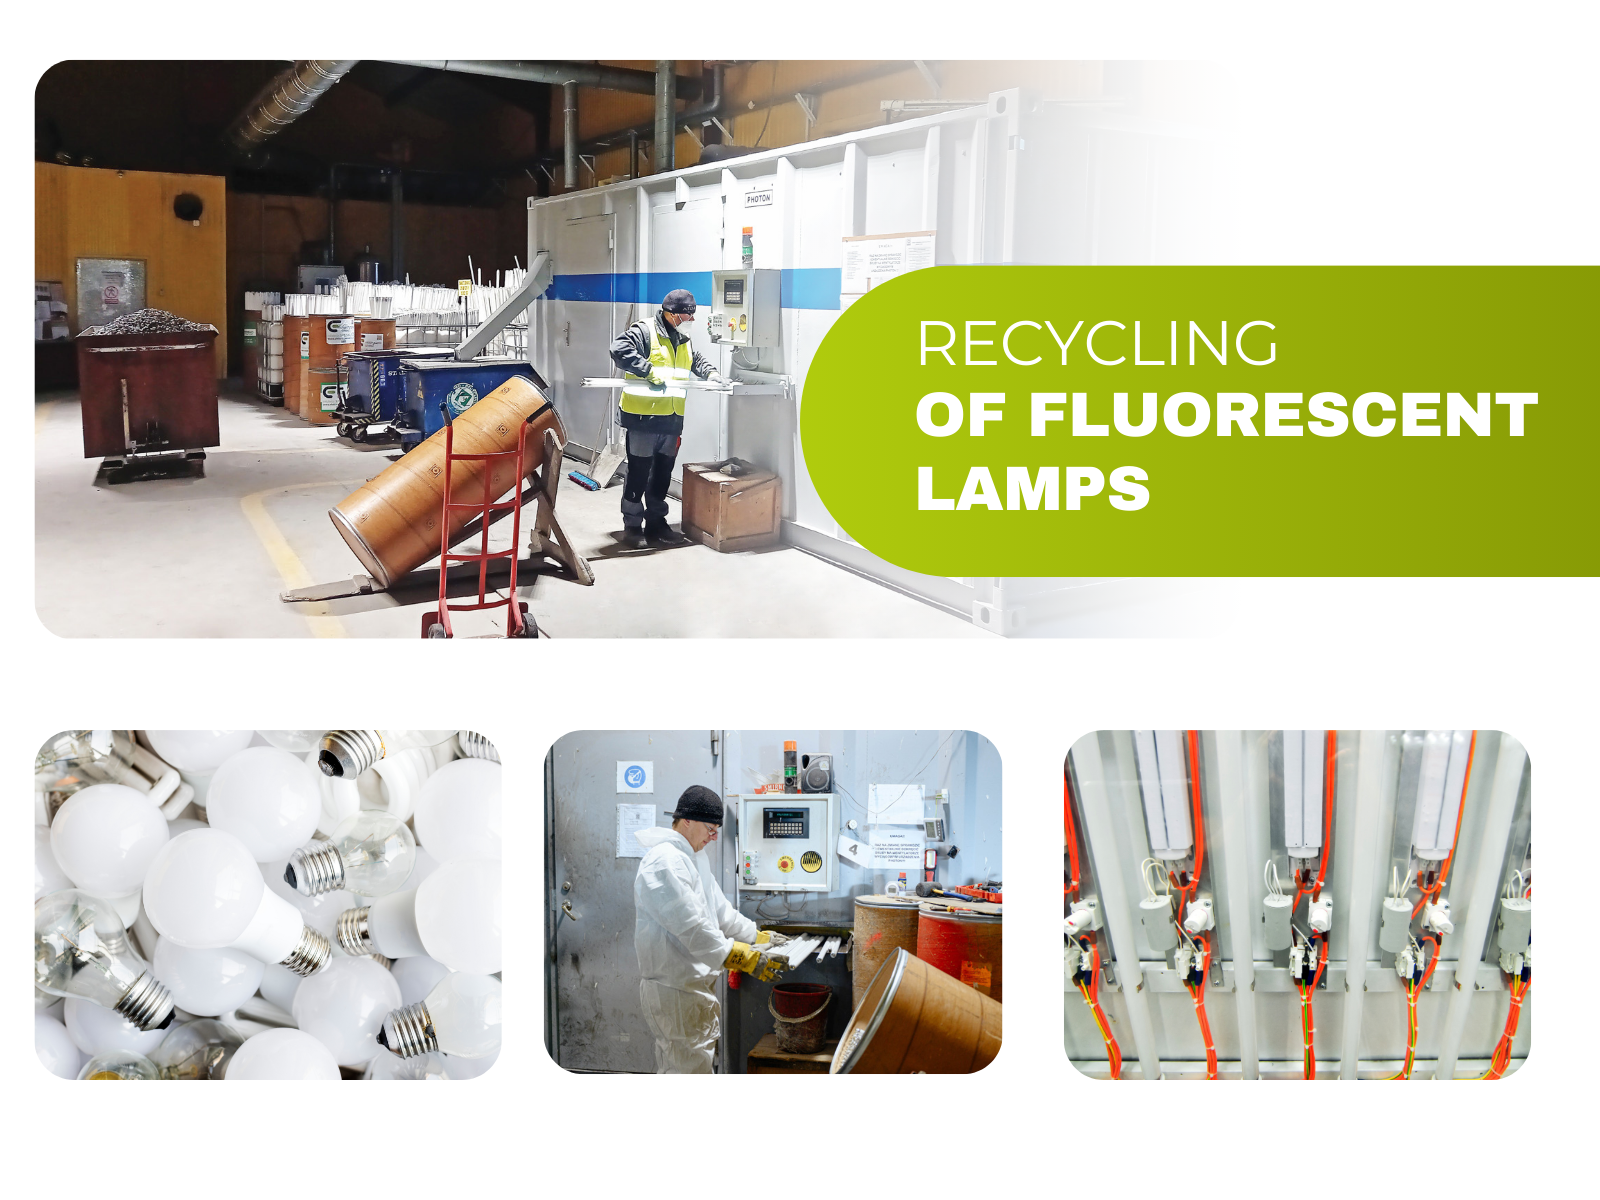 Recycling of fluorescent lamps​